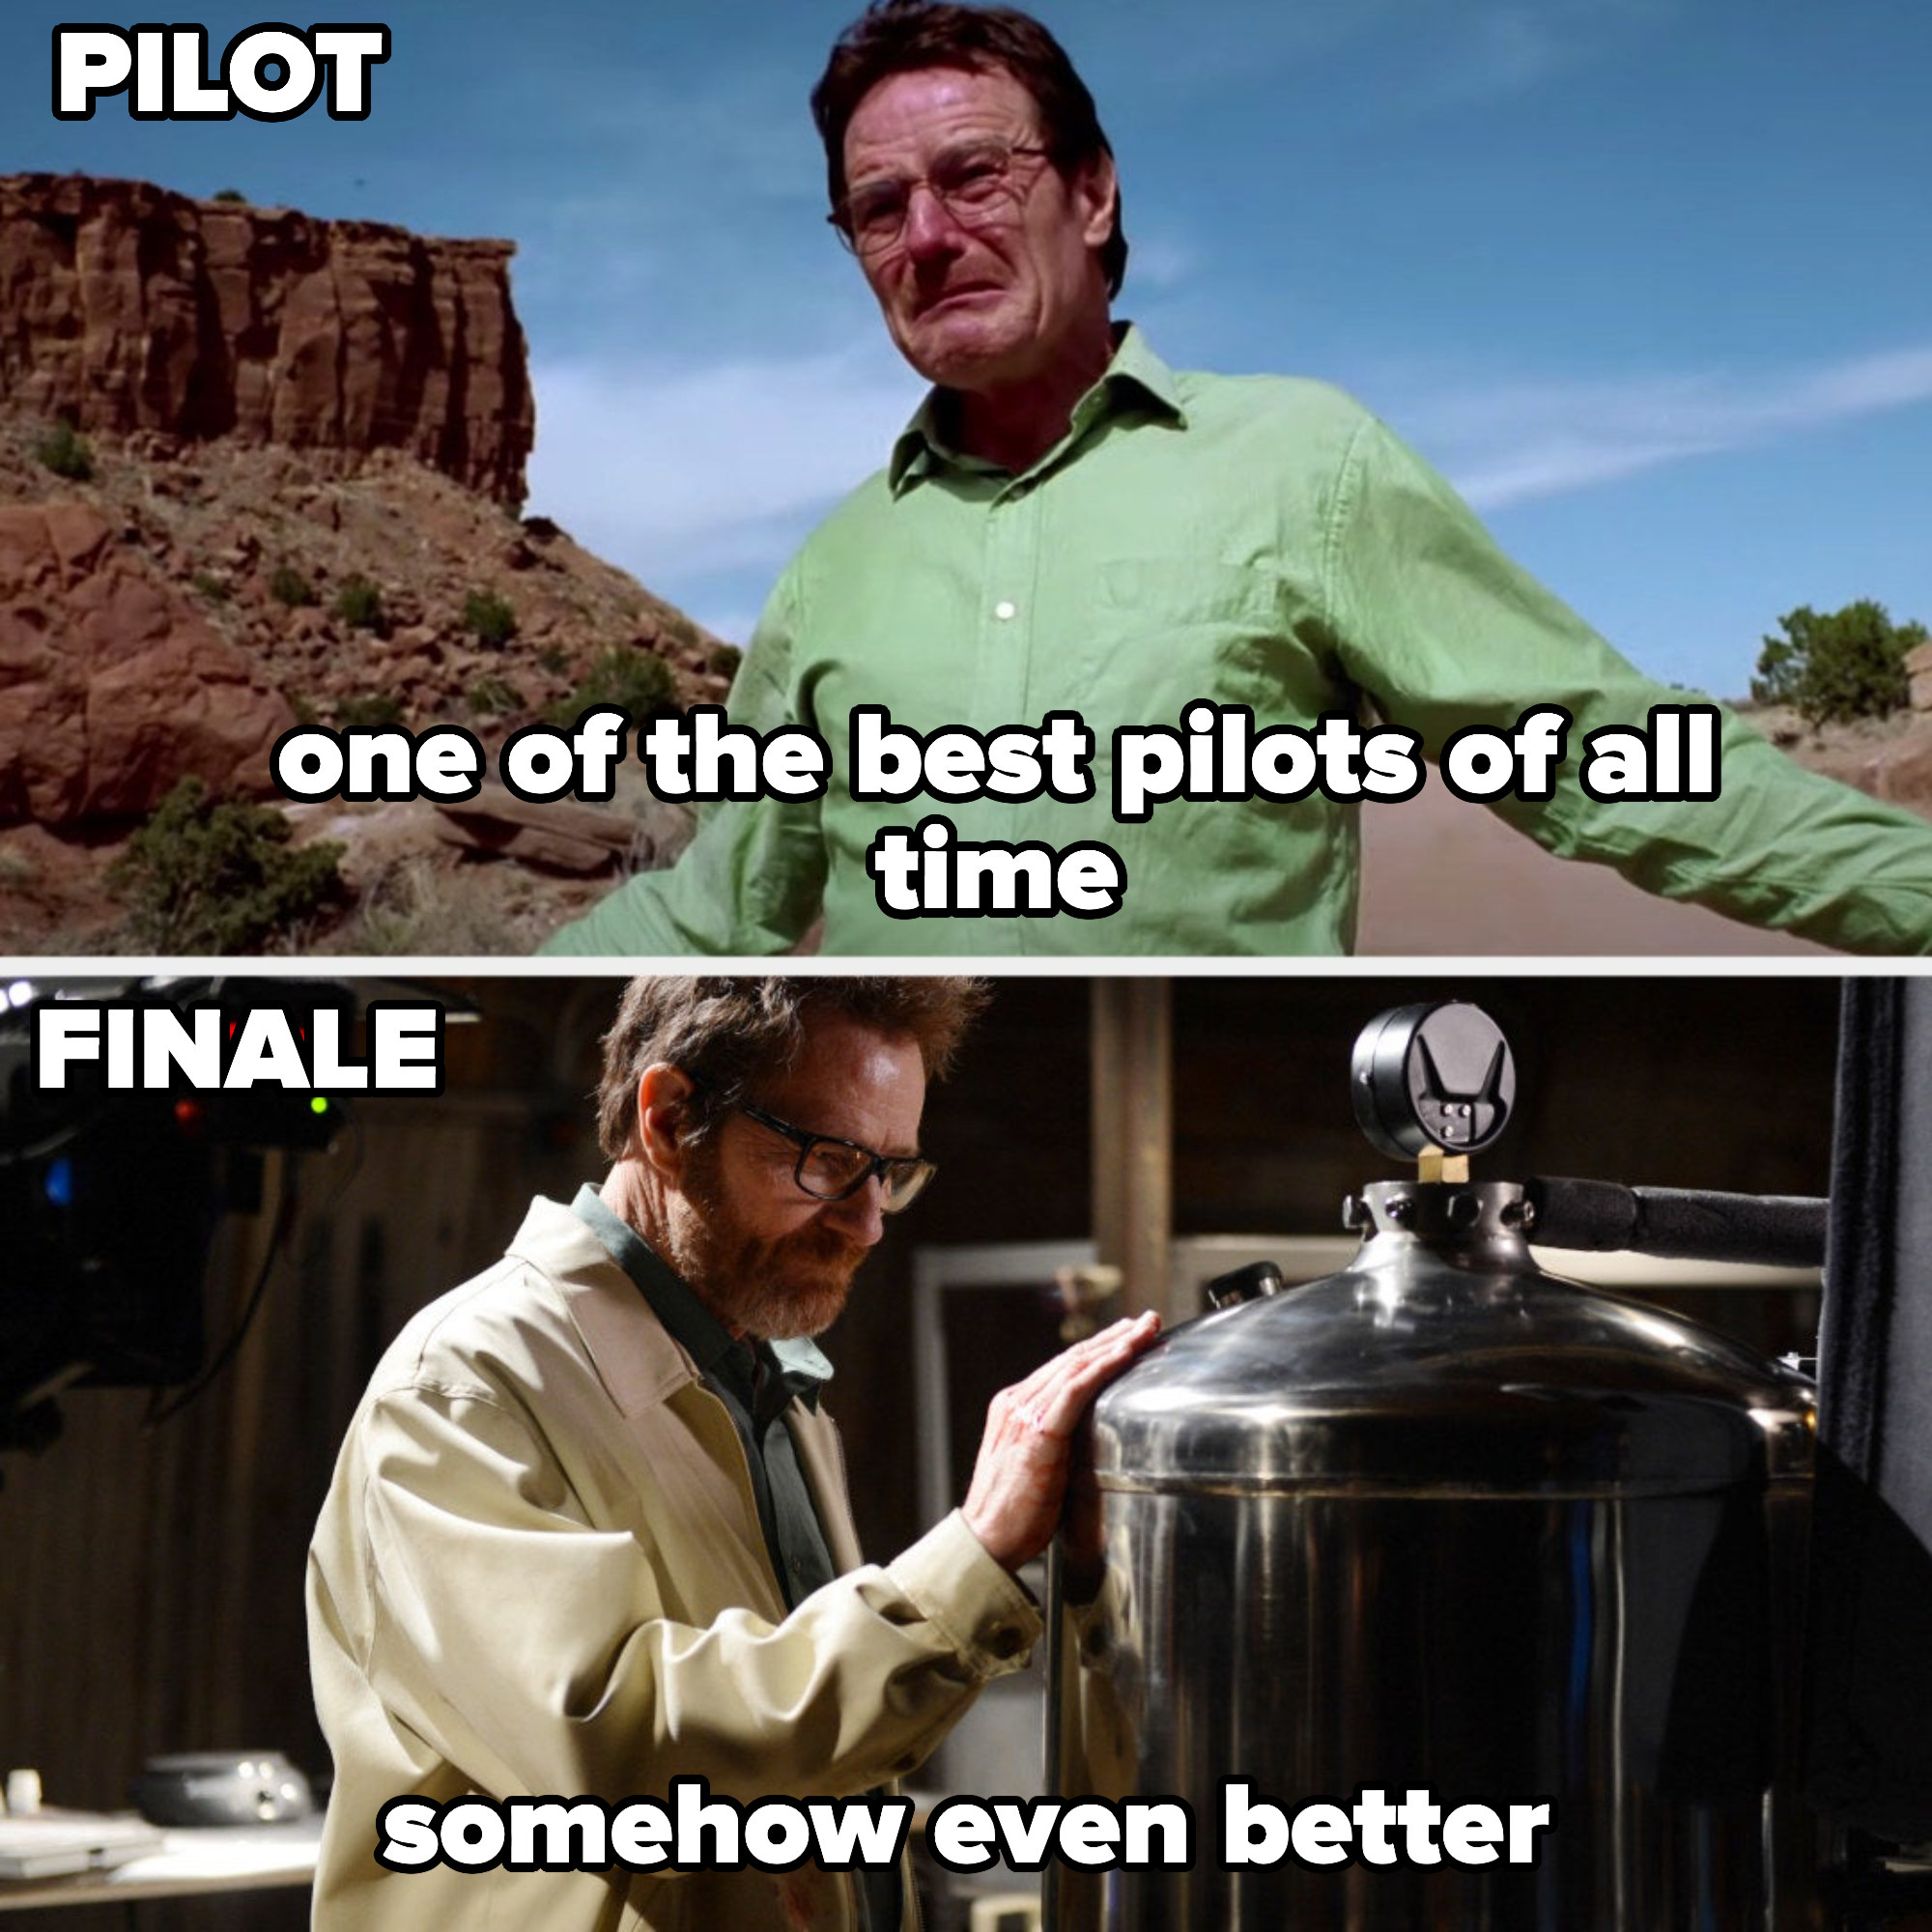 Walt in pilot labeled &quot;one of the best pilots of all time&quot; and in the finale labeled &quot;somehow even better&quot;